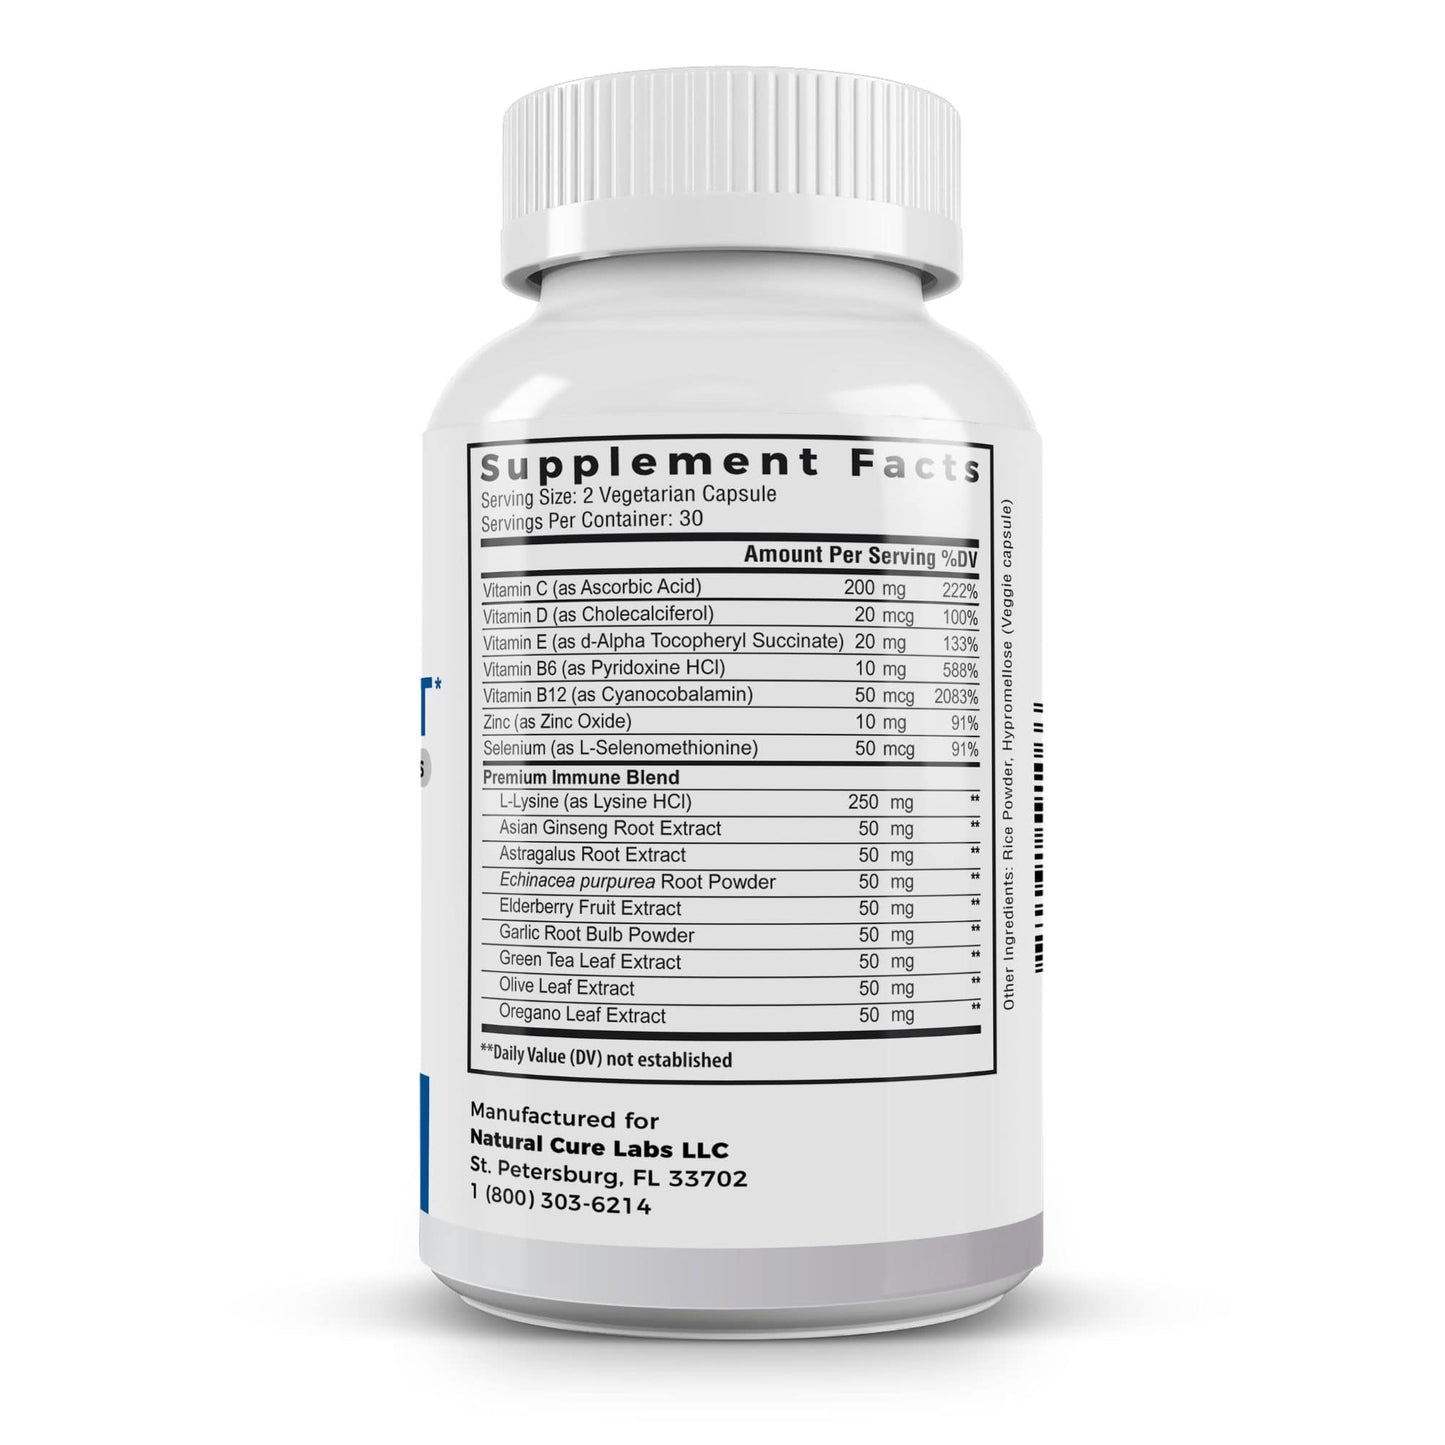 
                  
                    The supplement facts label on Palmara Health's Immune Support supplement offers a comprehensive breakdown of its 16-ingredient blend. Featuring essential vitamins such as C, D, E, B6, B12, selenium, and a premium immune blend including L-Lysine, this vegetarian capsule formulation aims to fortify immune function, as indicated by the detailed ingredients list.
                  
                